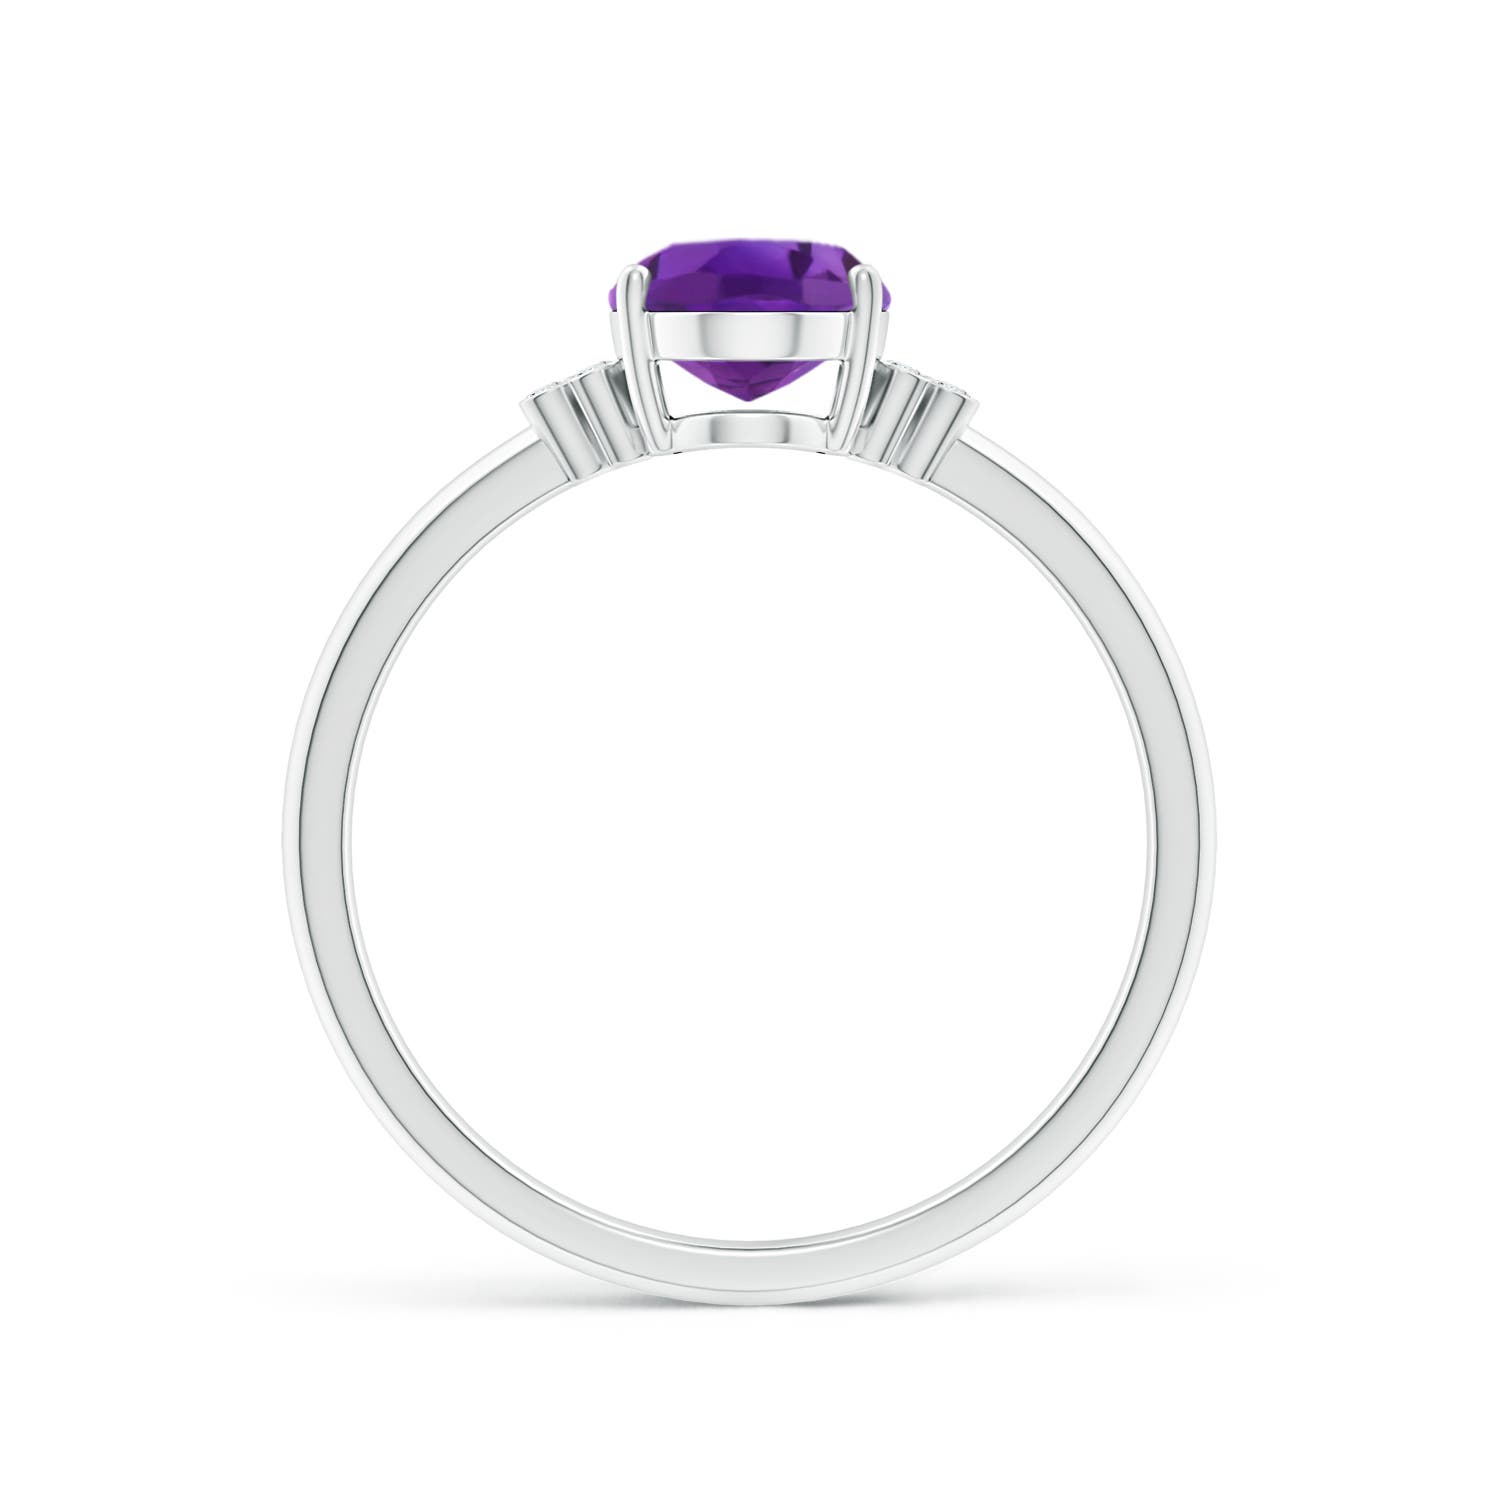 AAA- Amethyst / 1.2 CT / 14 KT White Gold